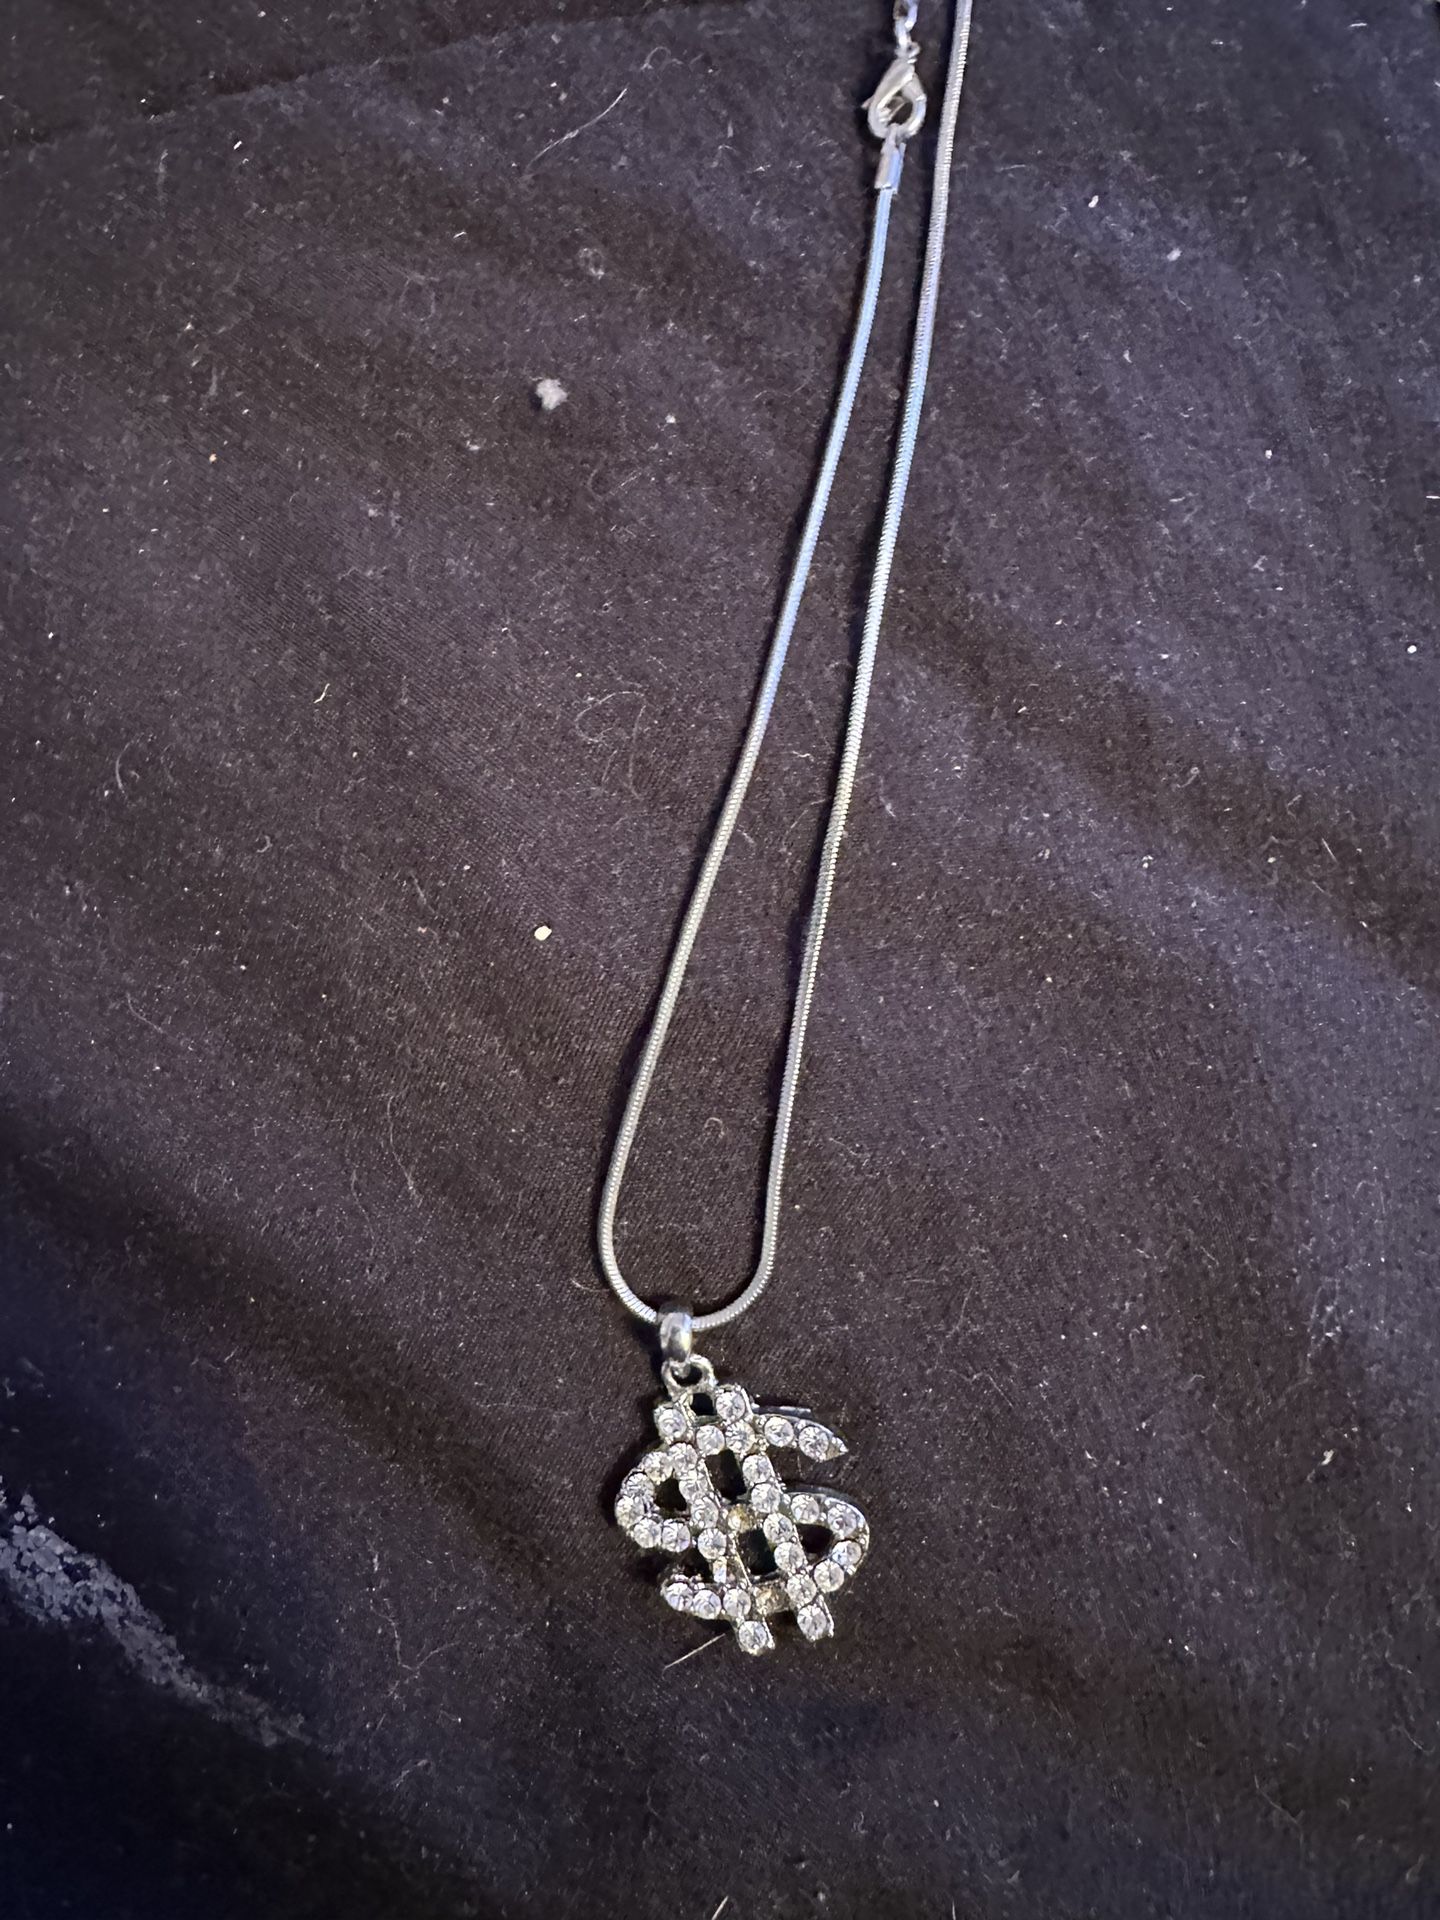 Louis Vuitton Necklace for Sale in North Tonawanda, NY - OfferUp